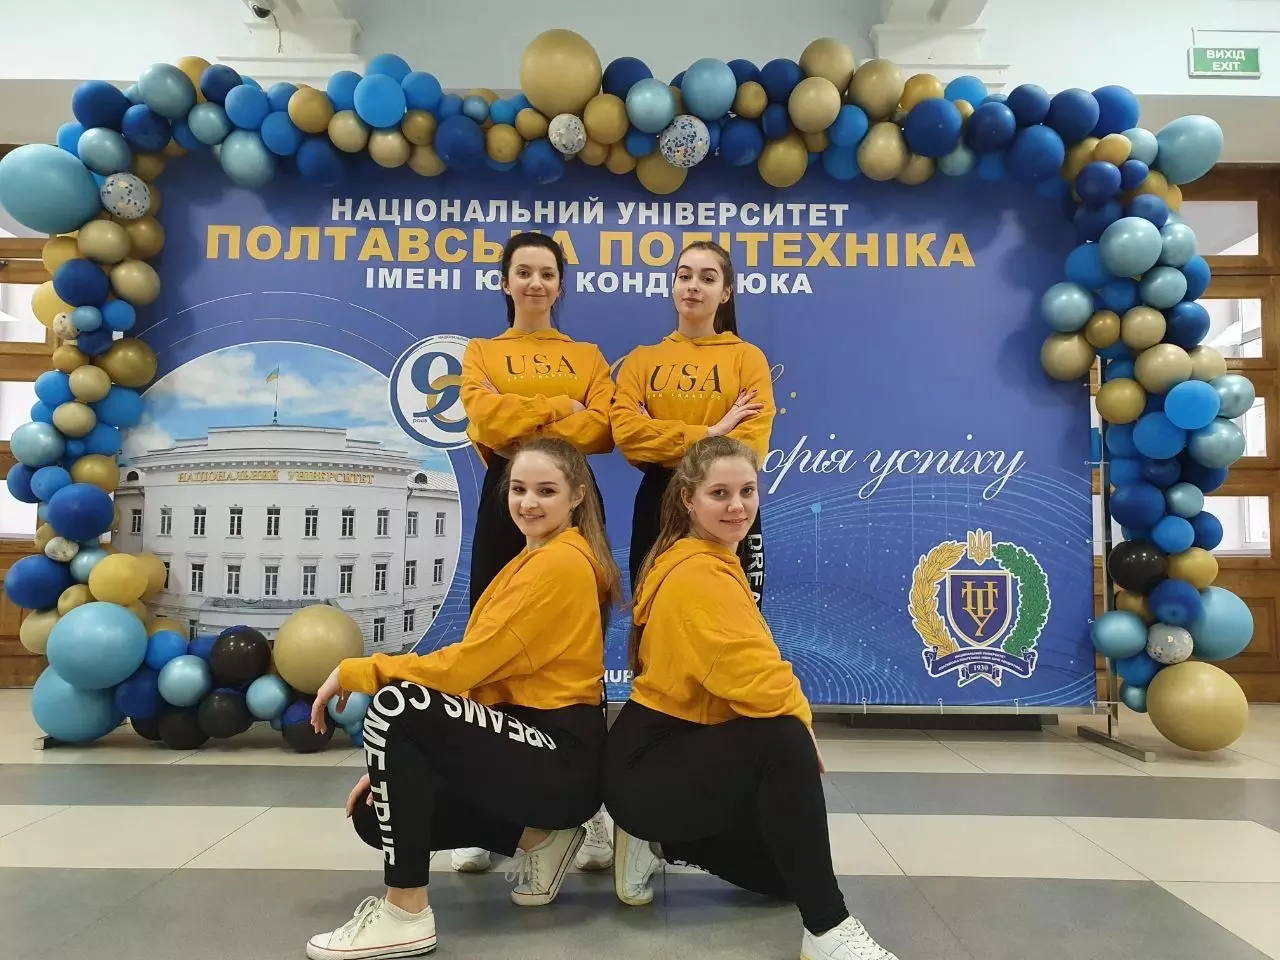 Fitness Club of Poltava Polytechnic Invites Everyone to Training Sessions